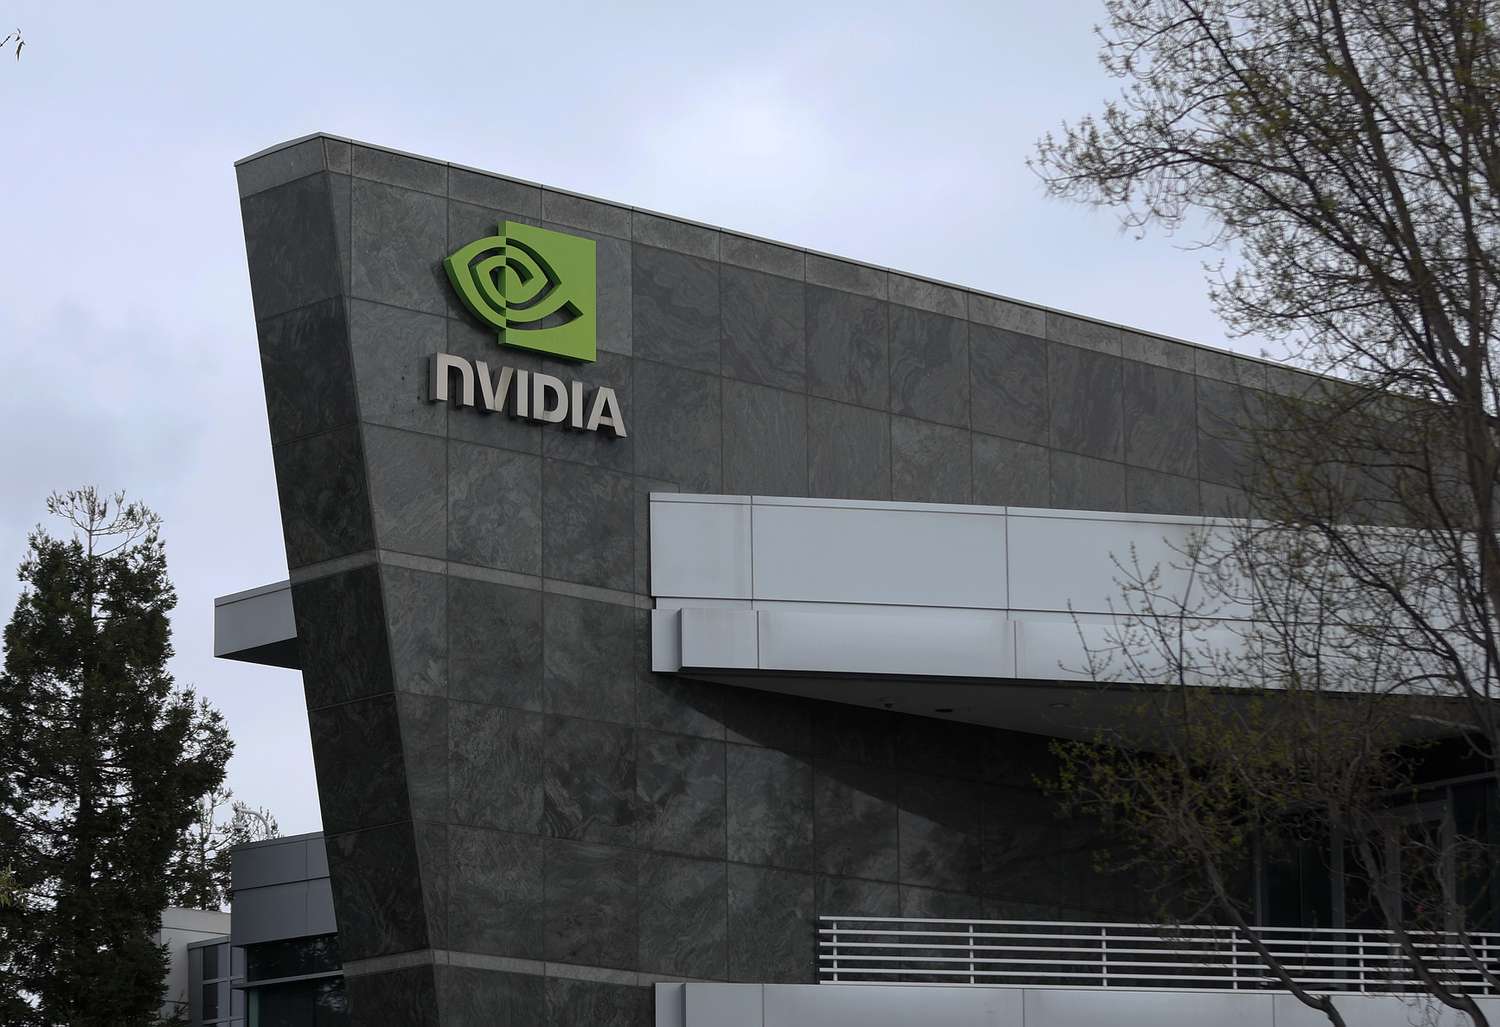 Intel, Google, Arm join forces against Nvidia’s strong dominance with open source.